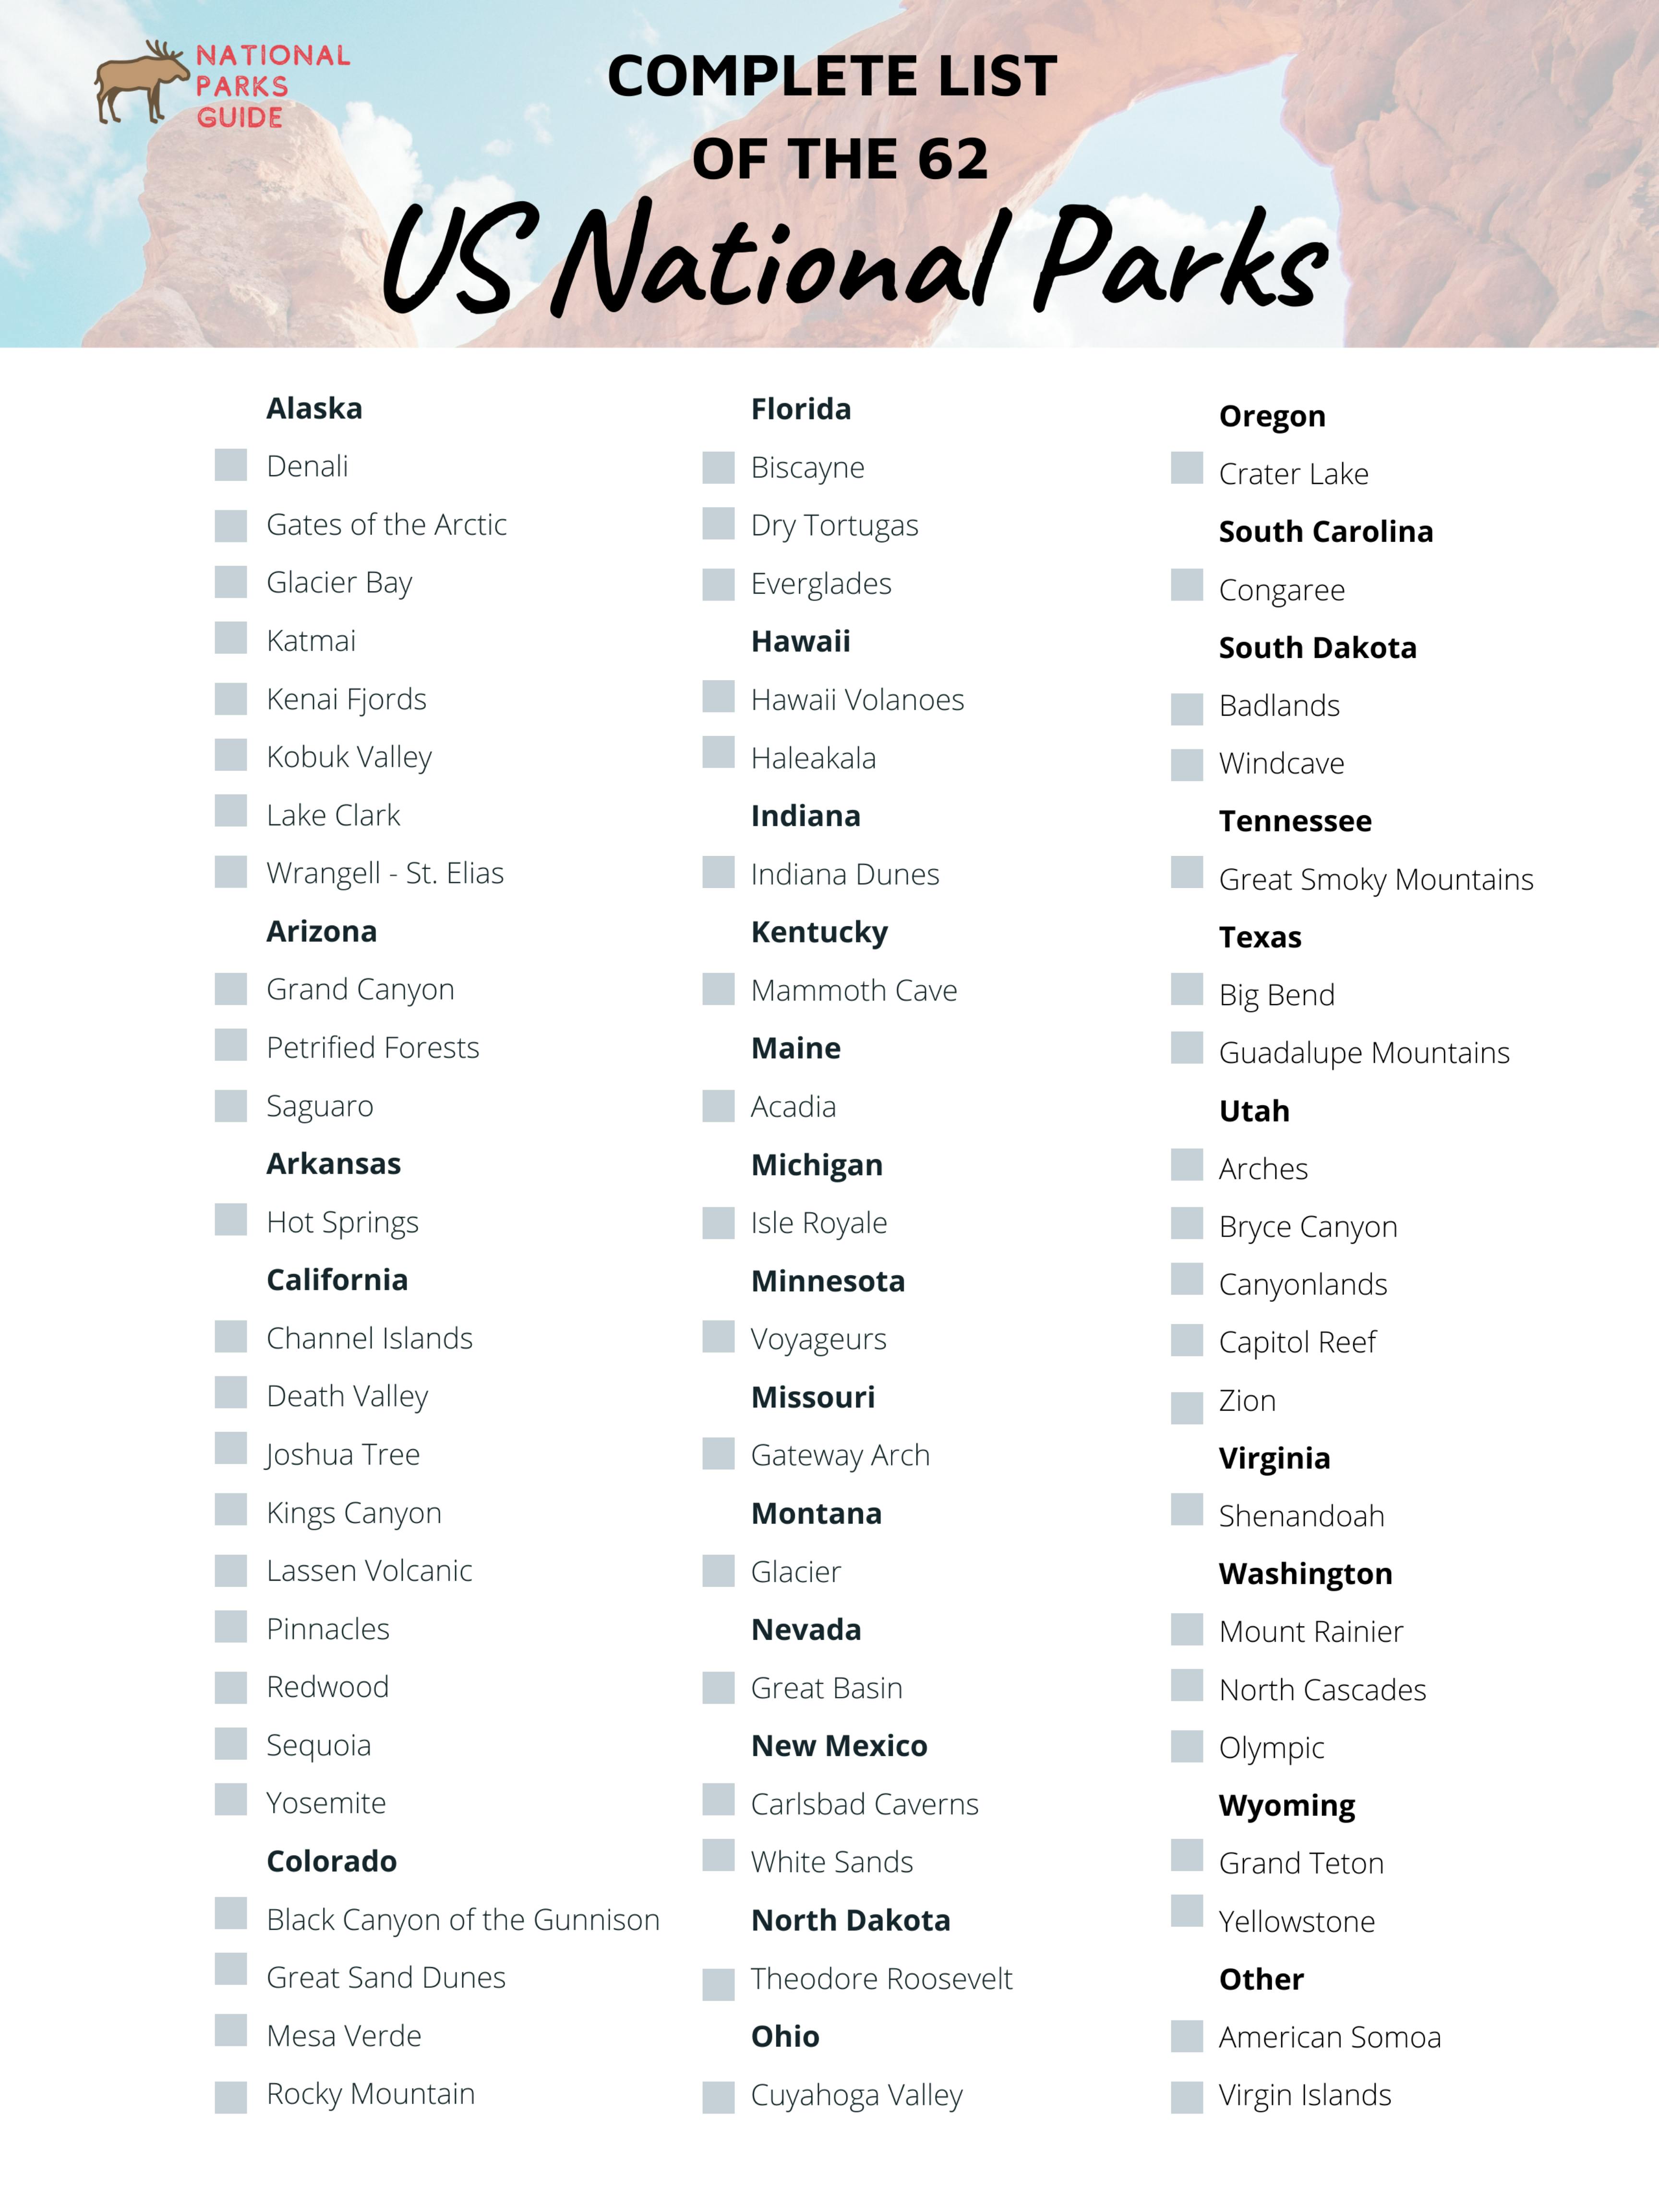 complete-list-of-the-62-national-parks-in-2020